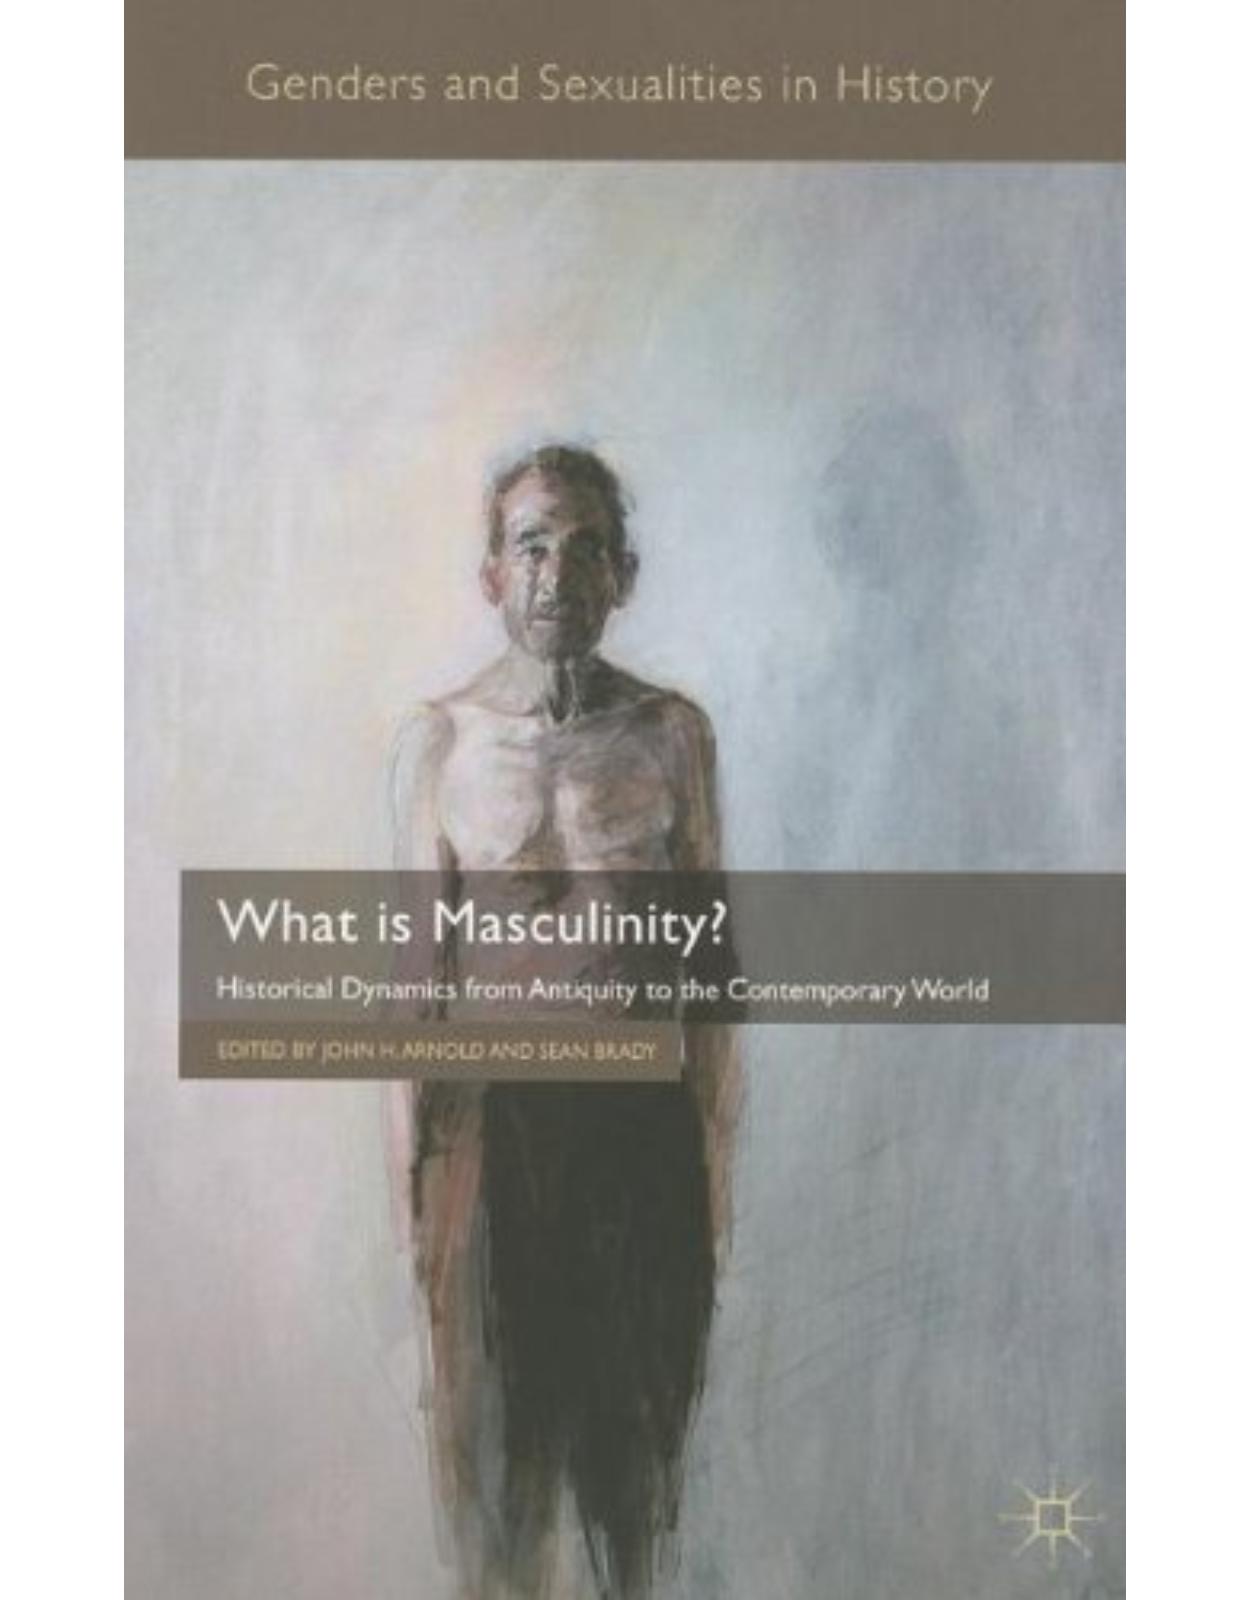 What is Masculinity?: Historical Dynamics from Antiquity to the Contemporary World (Genders and Sexualities in History) 